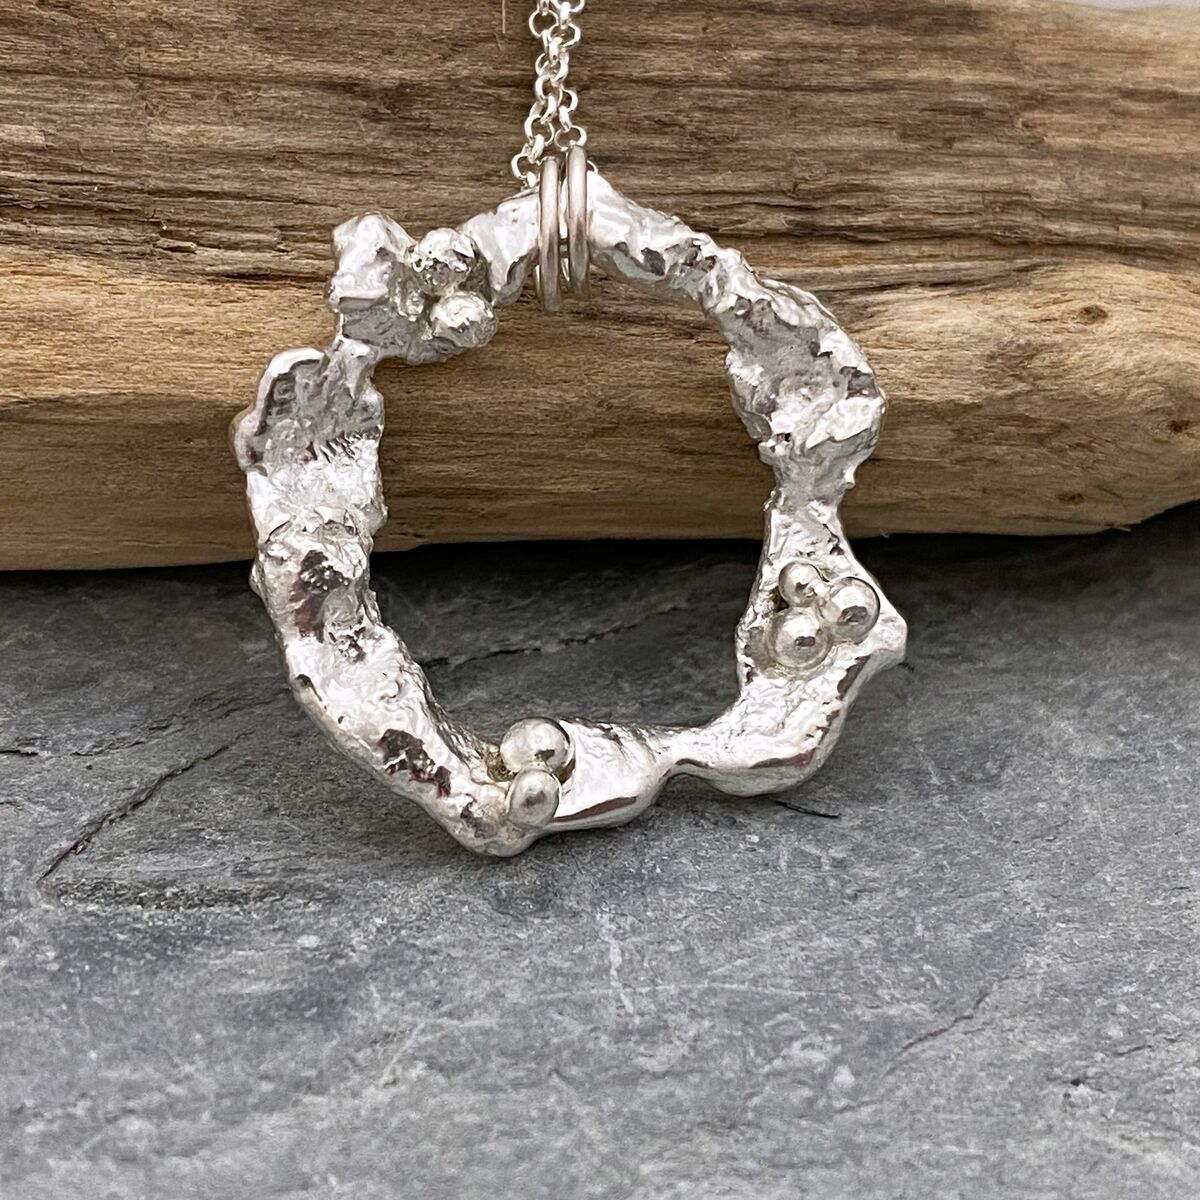 Organic silver necklace 5